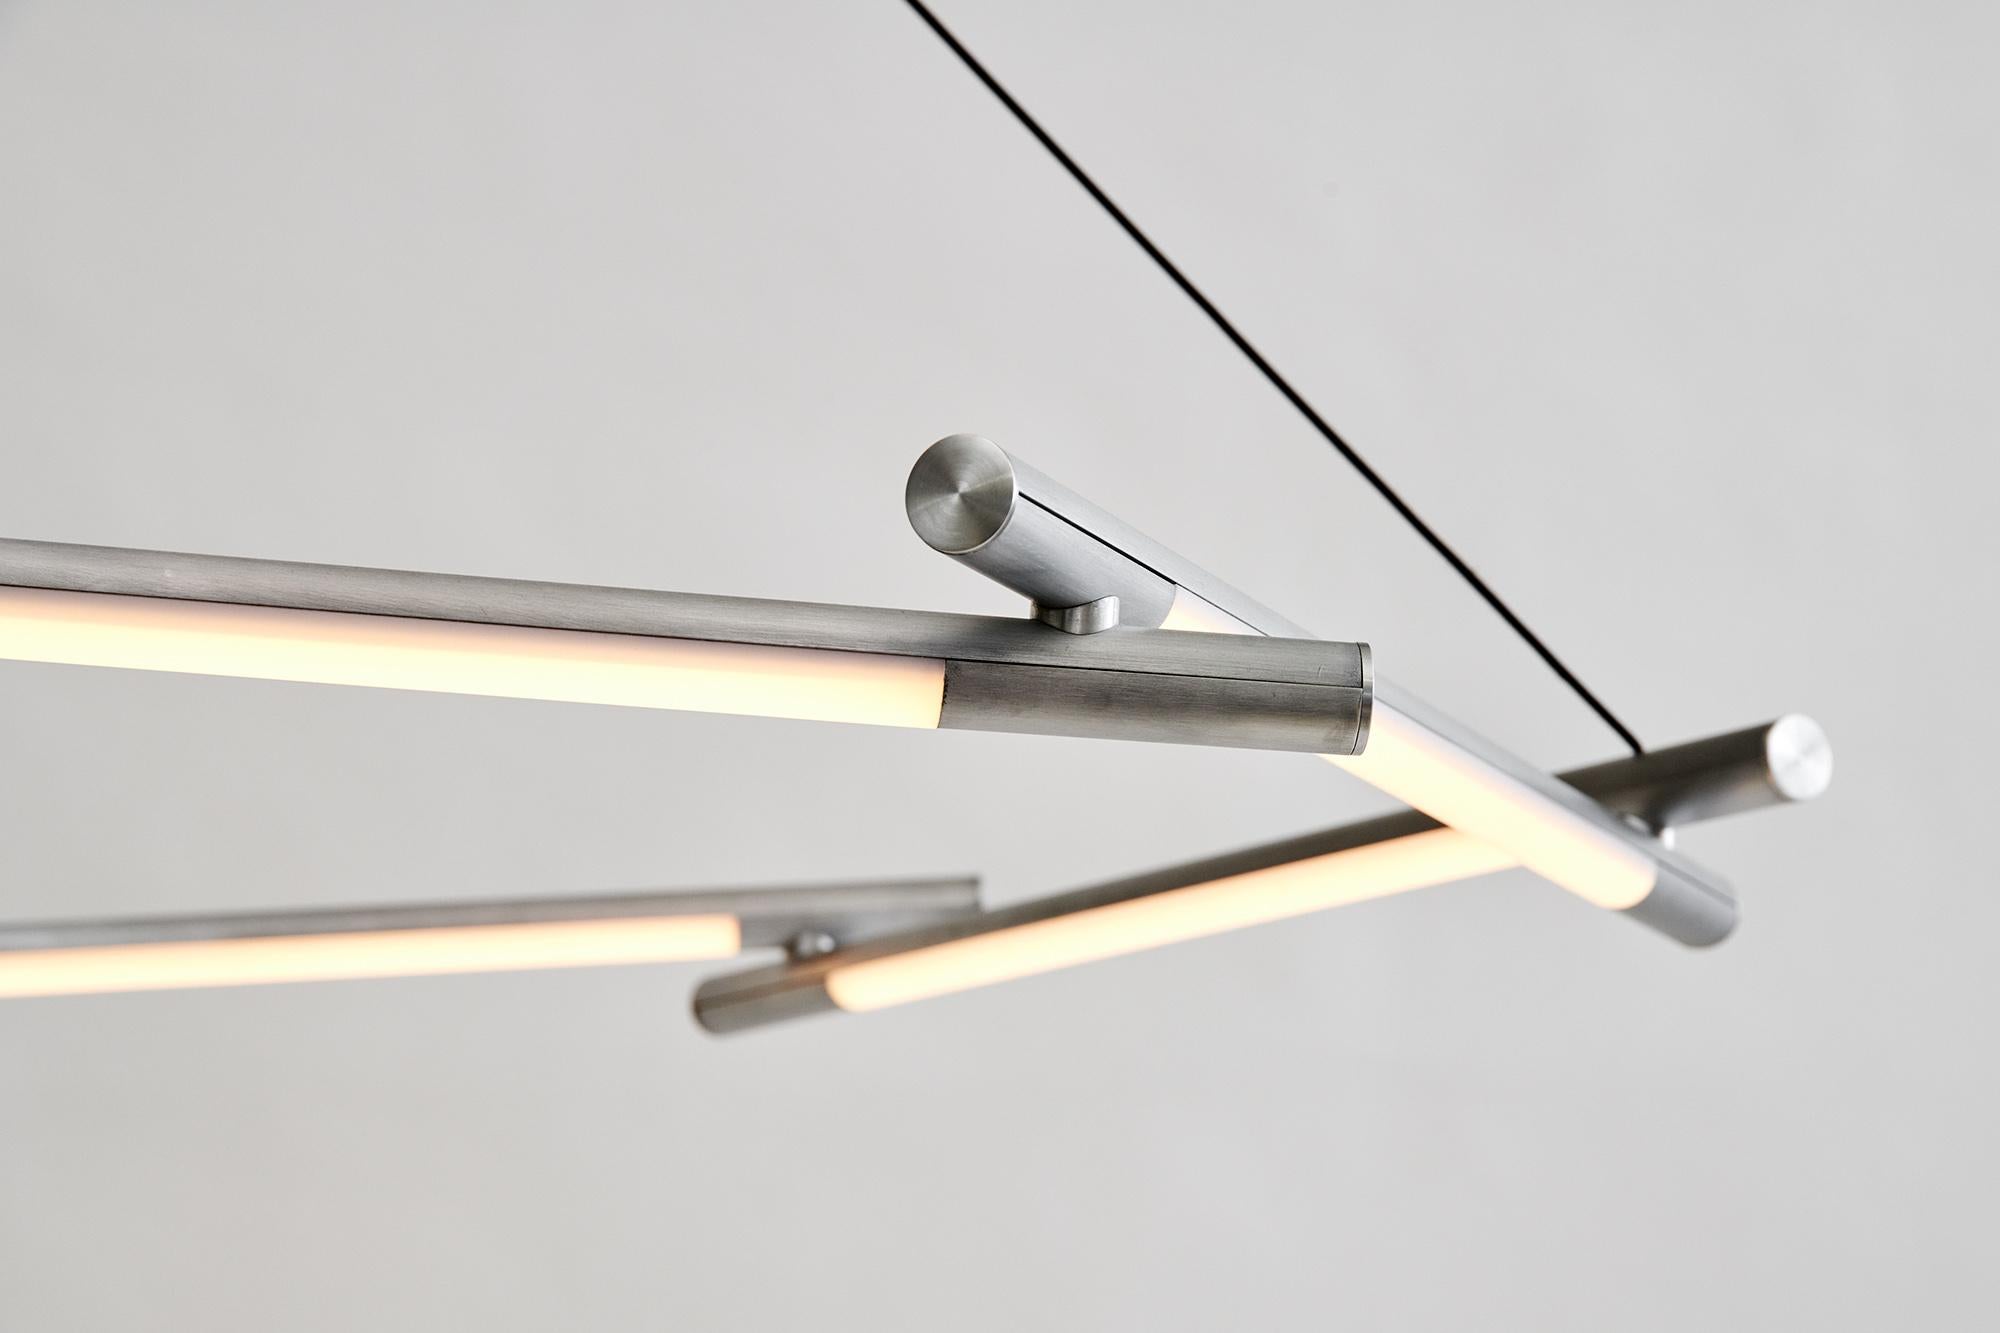 An angular, industrial take on a classic luxury object. A centerpiece to illuminate and elevate any space.
The core design is a set of interlocking extruded aluminum profiles. The dimmable LED source can provide either functional or ambient